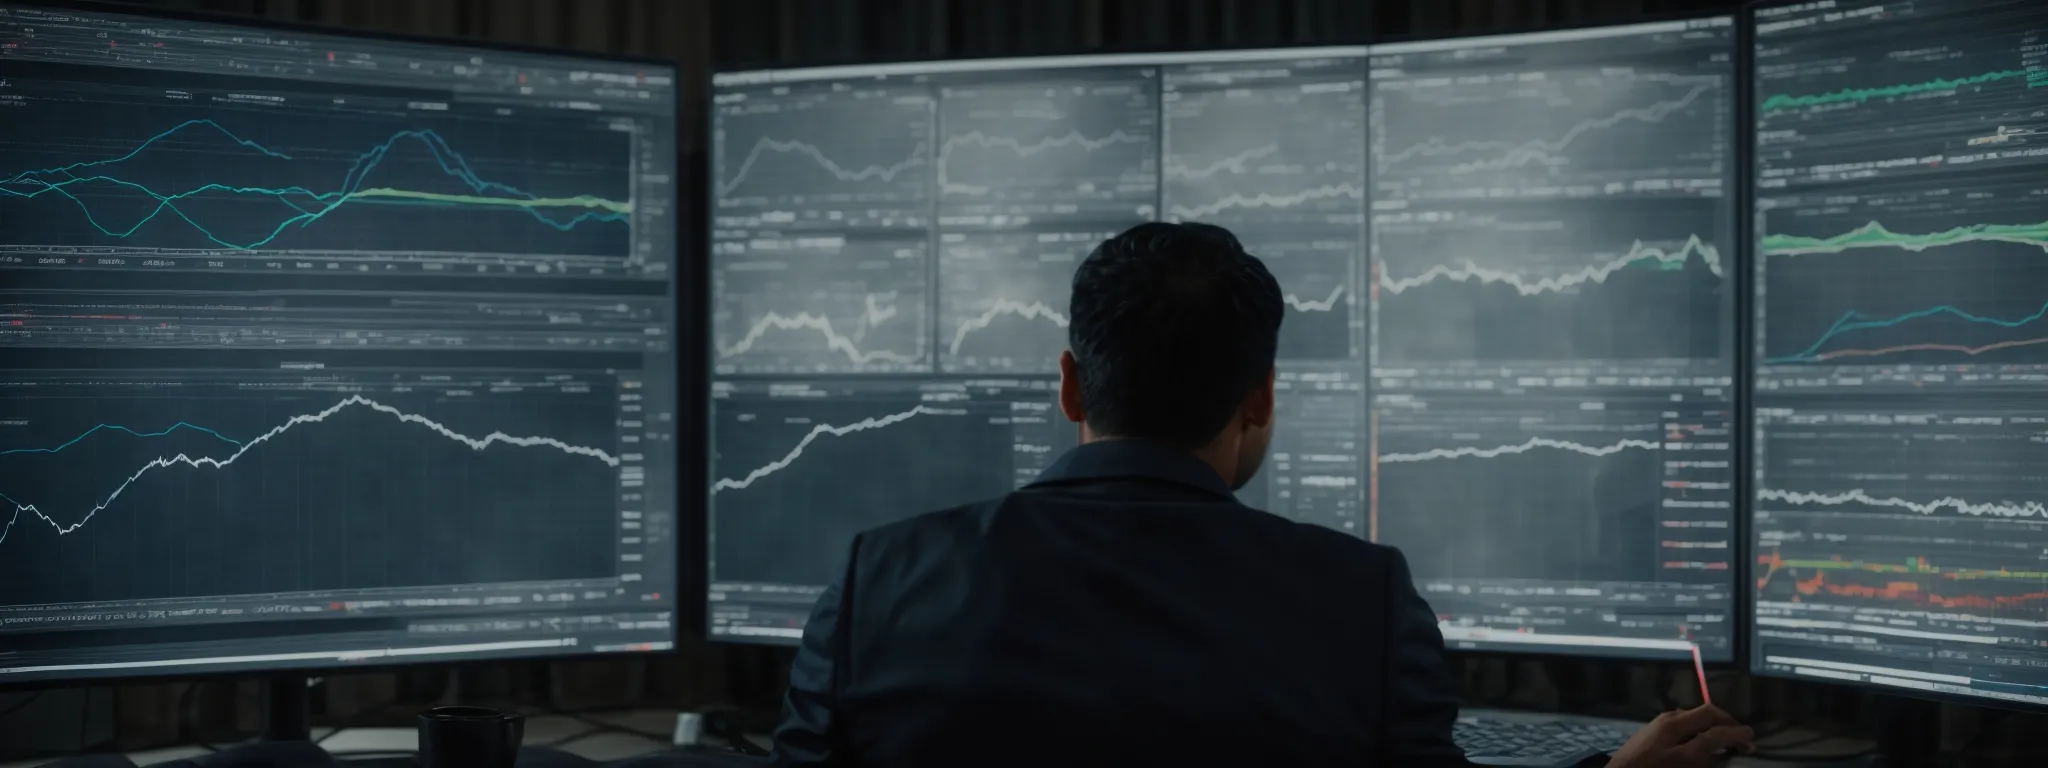 a person intently analyzing complex data charts that represent web traffic and industry trends on a large monitor.